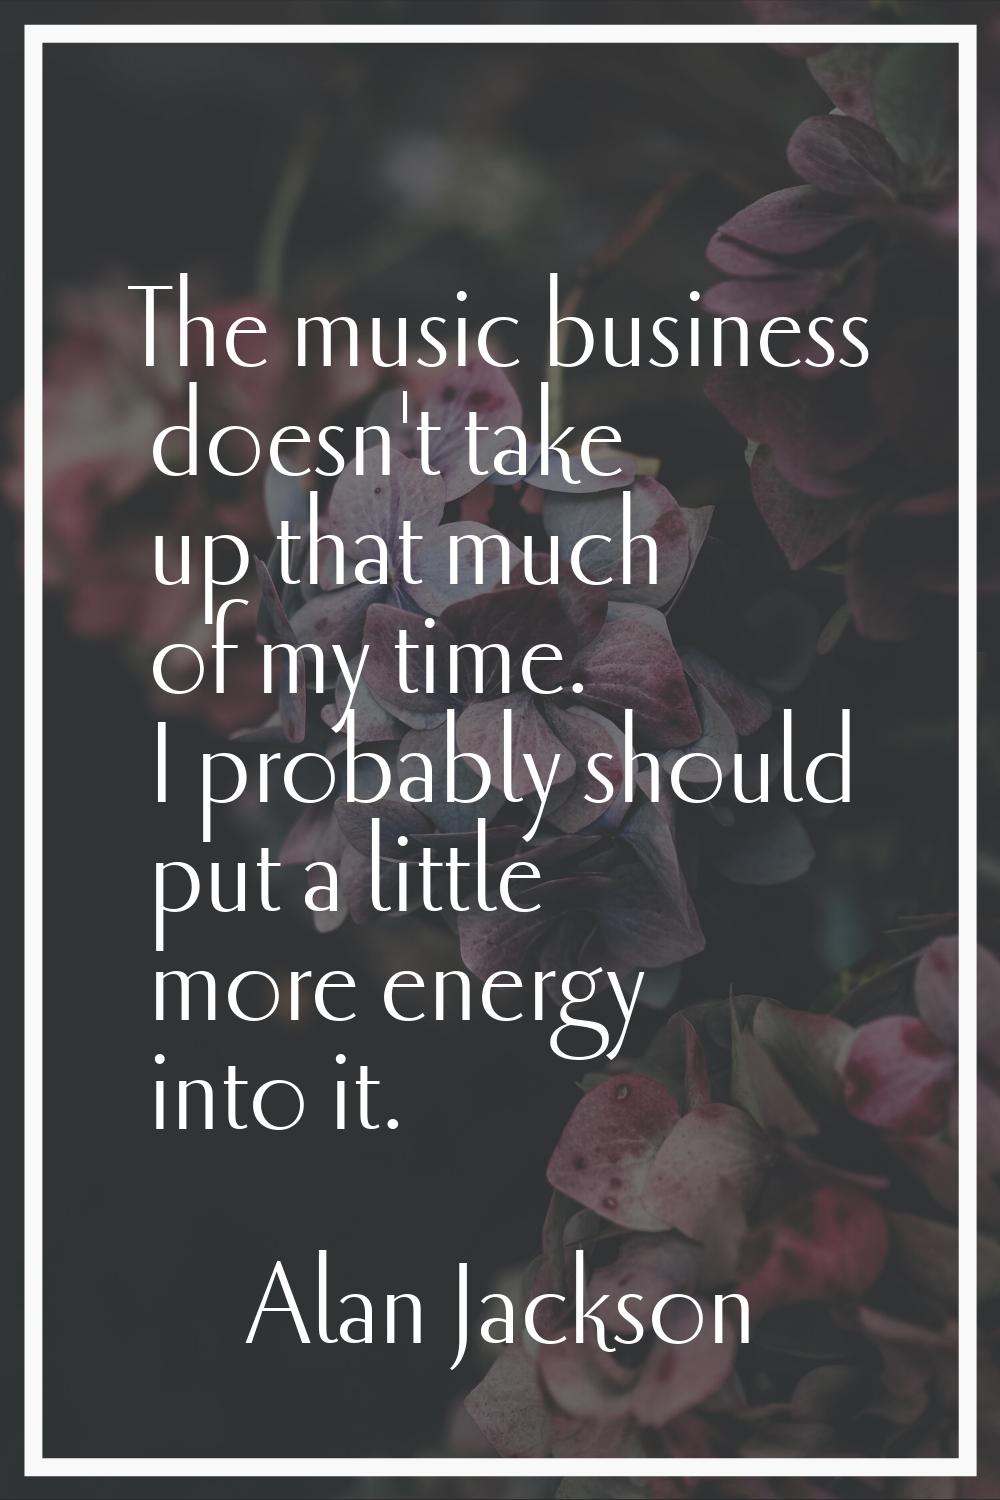 The music business doesn't take up that much of my time. I probably should put a little more energy